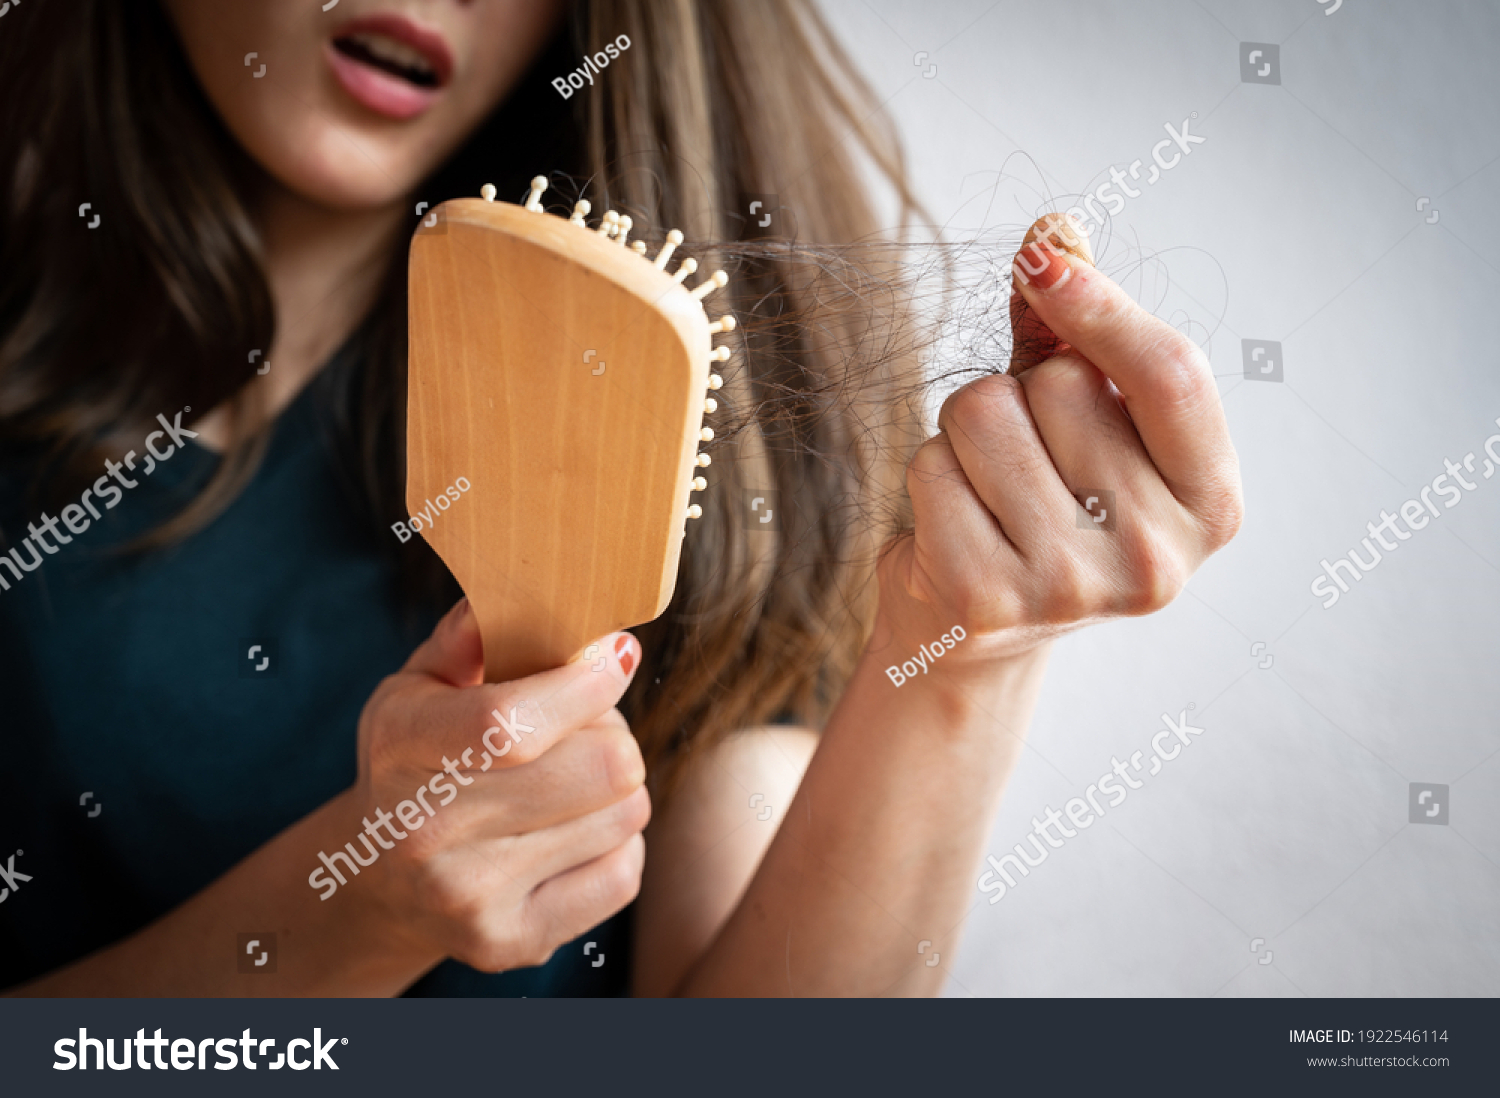 Close-up of worried woman holding comb with hair loss after brushing her hair. Hair loss it cause from family history, hormonal changes, unhealthy of aging. #1922546114